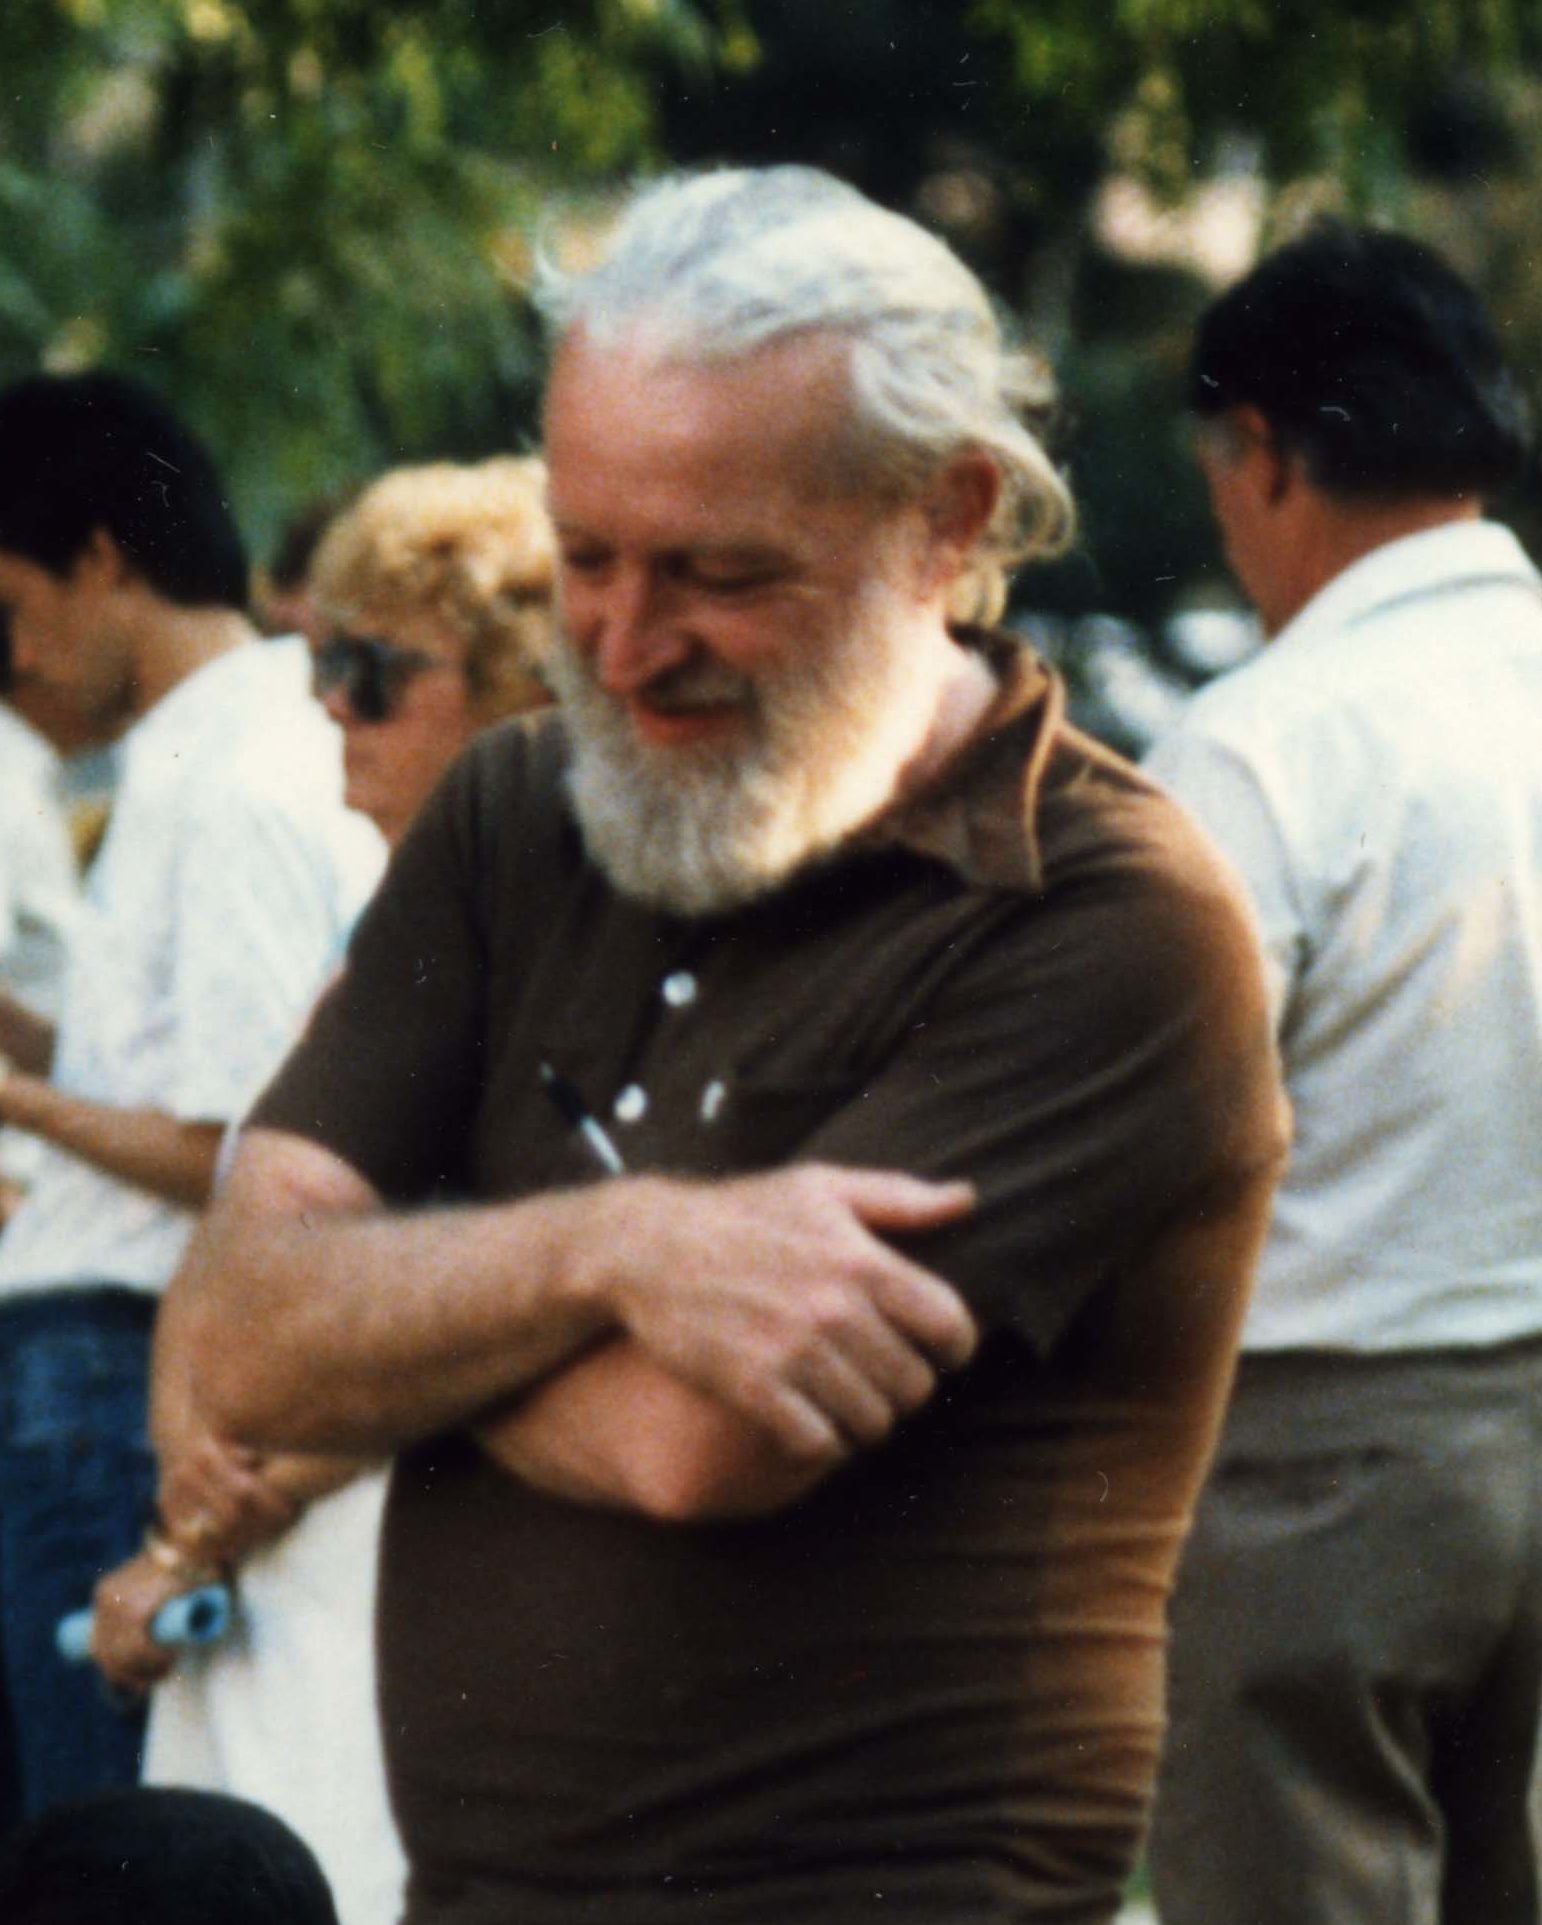 An image of C. Loring Brace: a tall white man with gray hair and beard, wearing a black t-shirt and standing with his arms crossed.